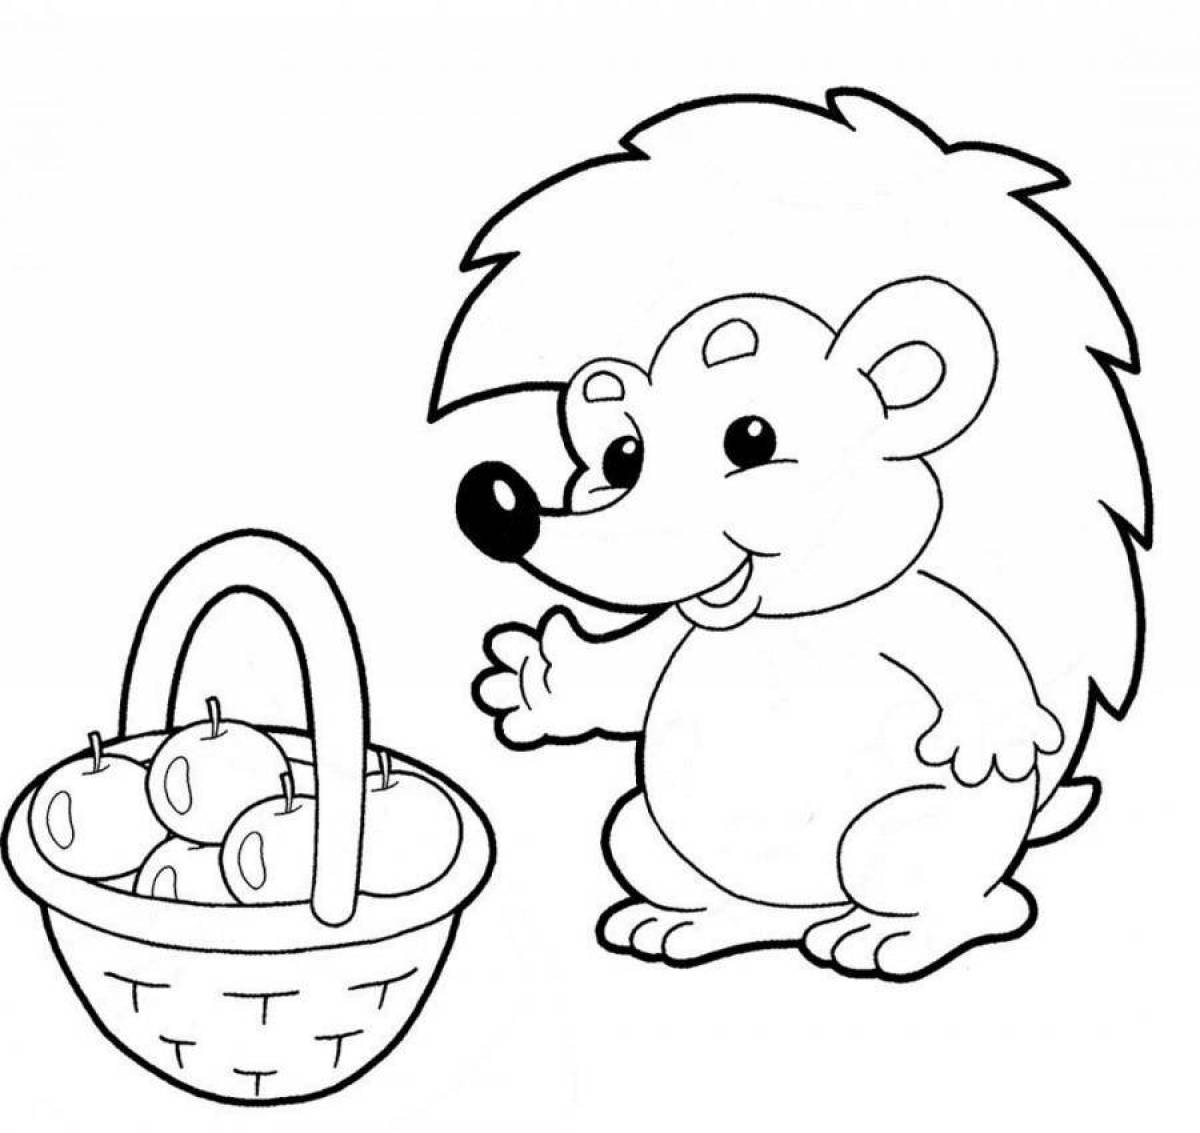 Color-frenzy coloring page in kindergarten 3-4 years old